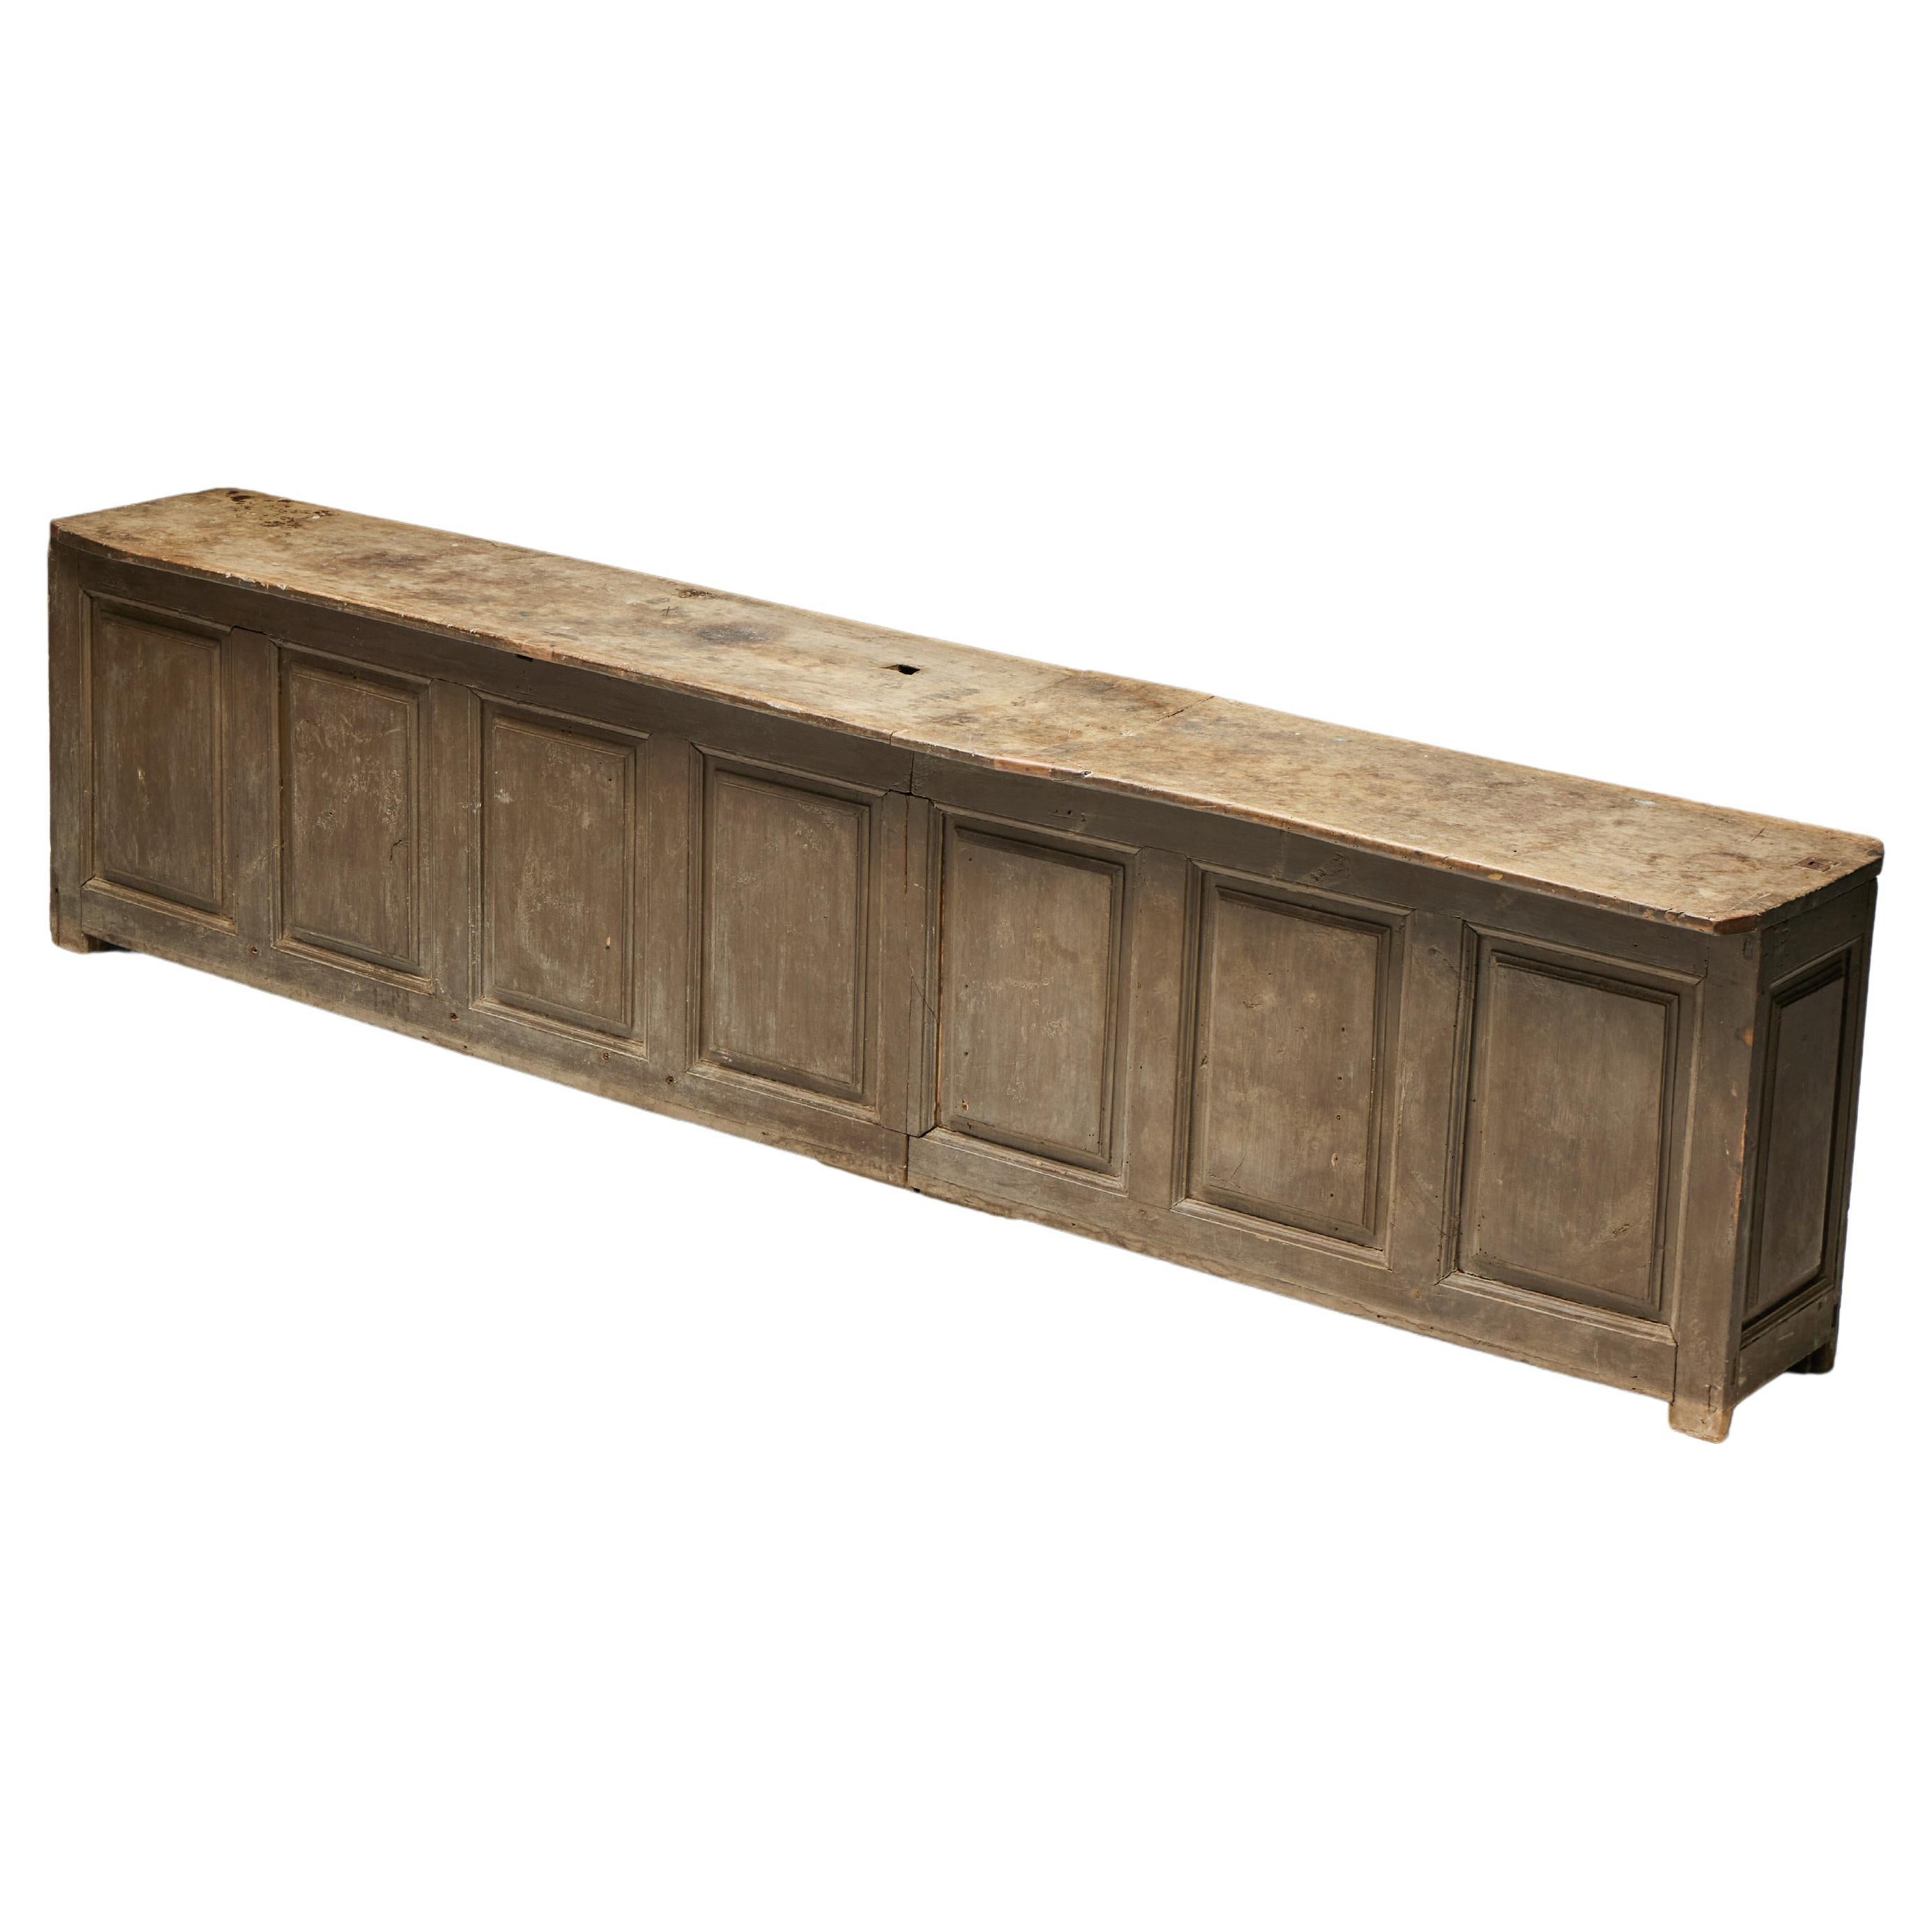 Rustic Art Populaire Freestanding Bar Counter, France, 19th Century For Sale